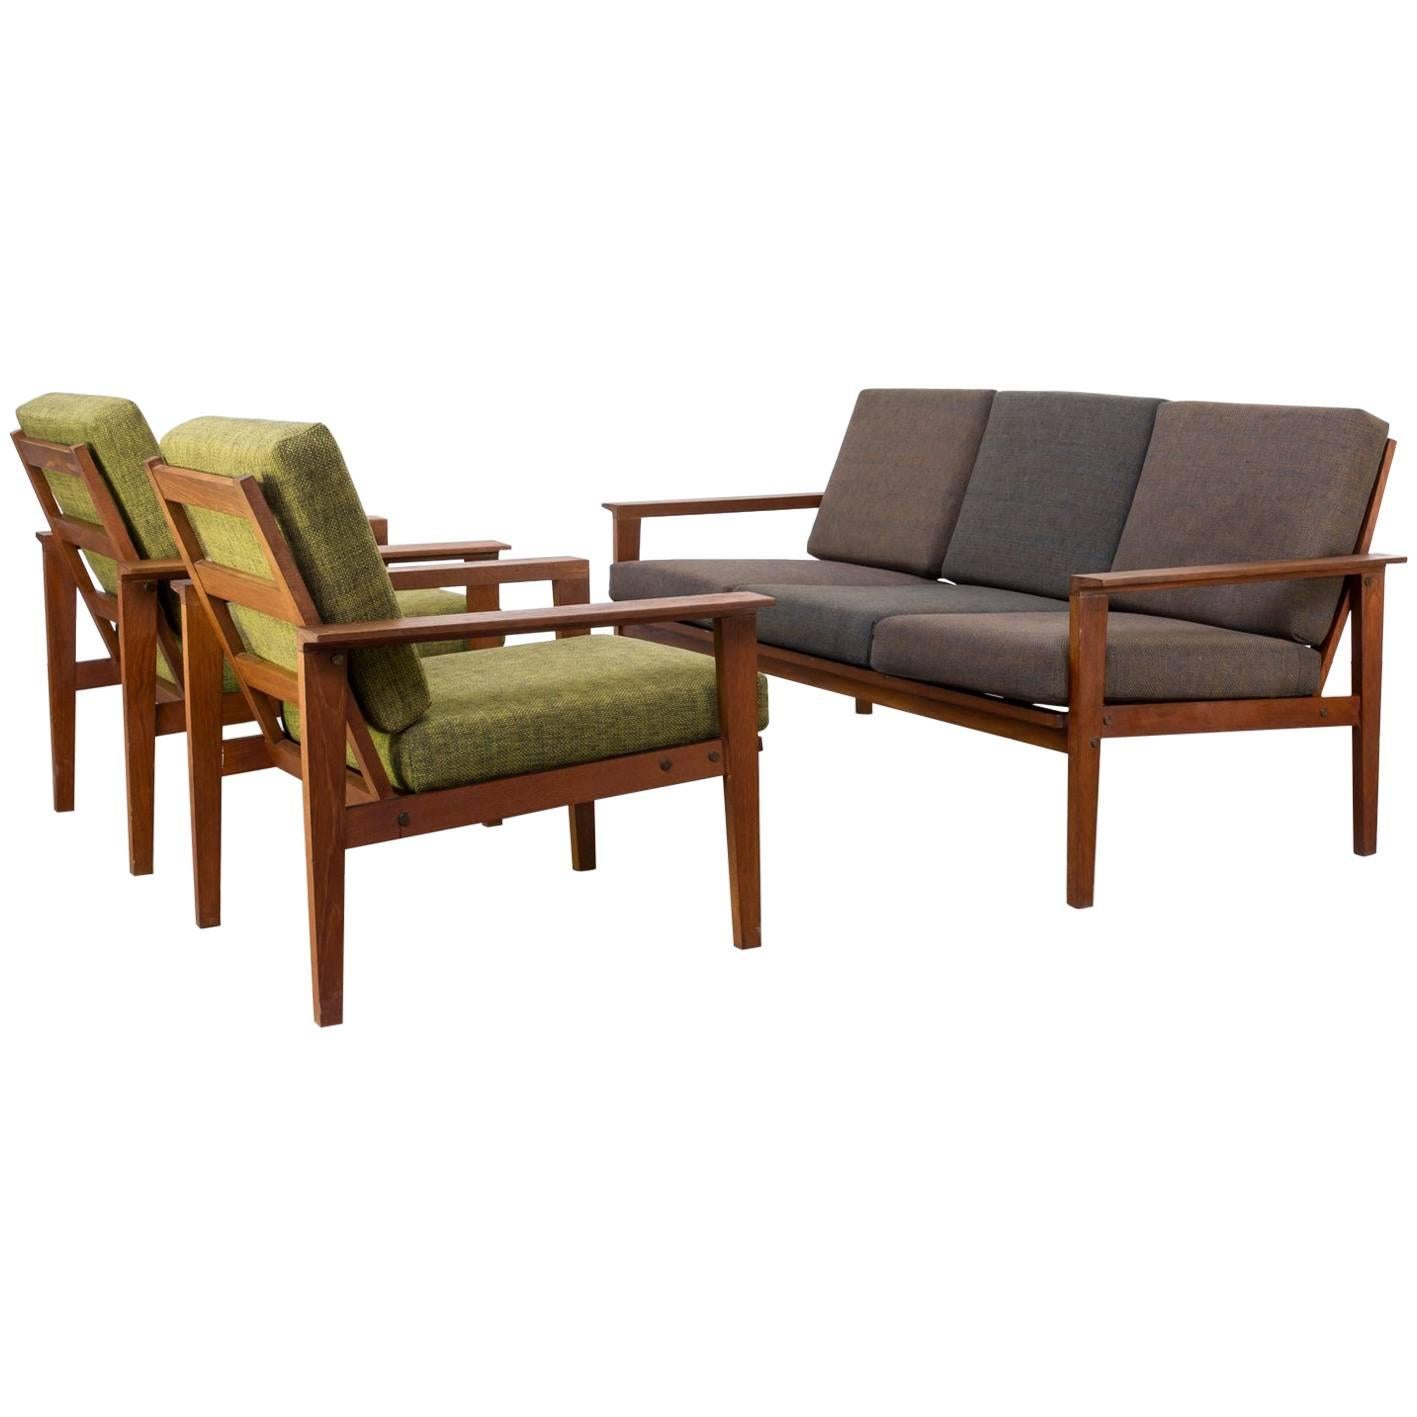 1960s Teak Seating Group One Three-Seat Sofa, Two Fauteuils For Sale